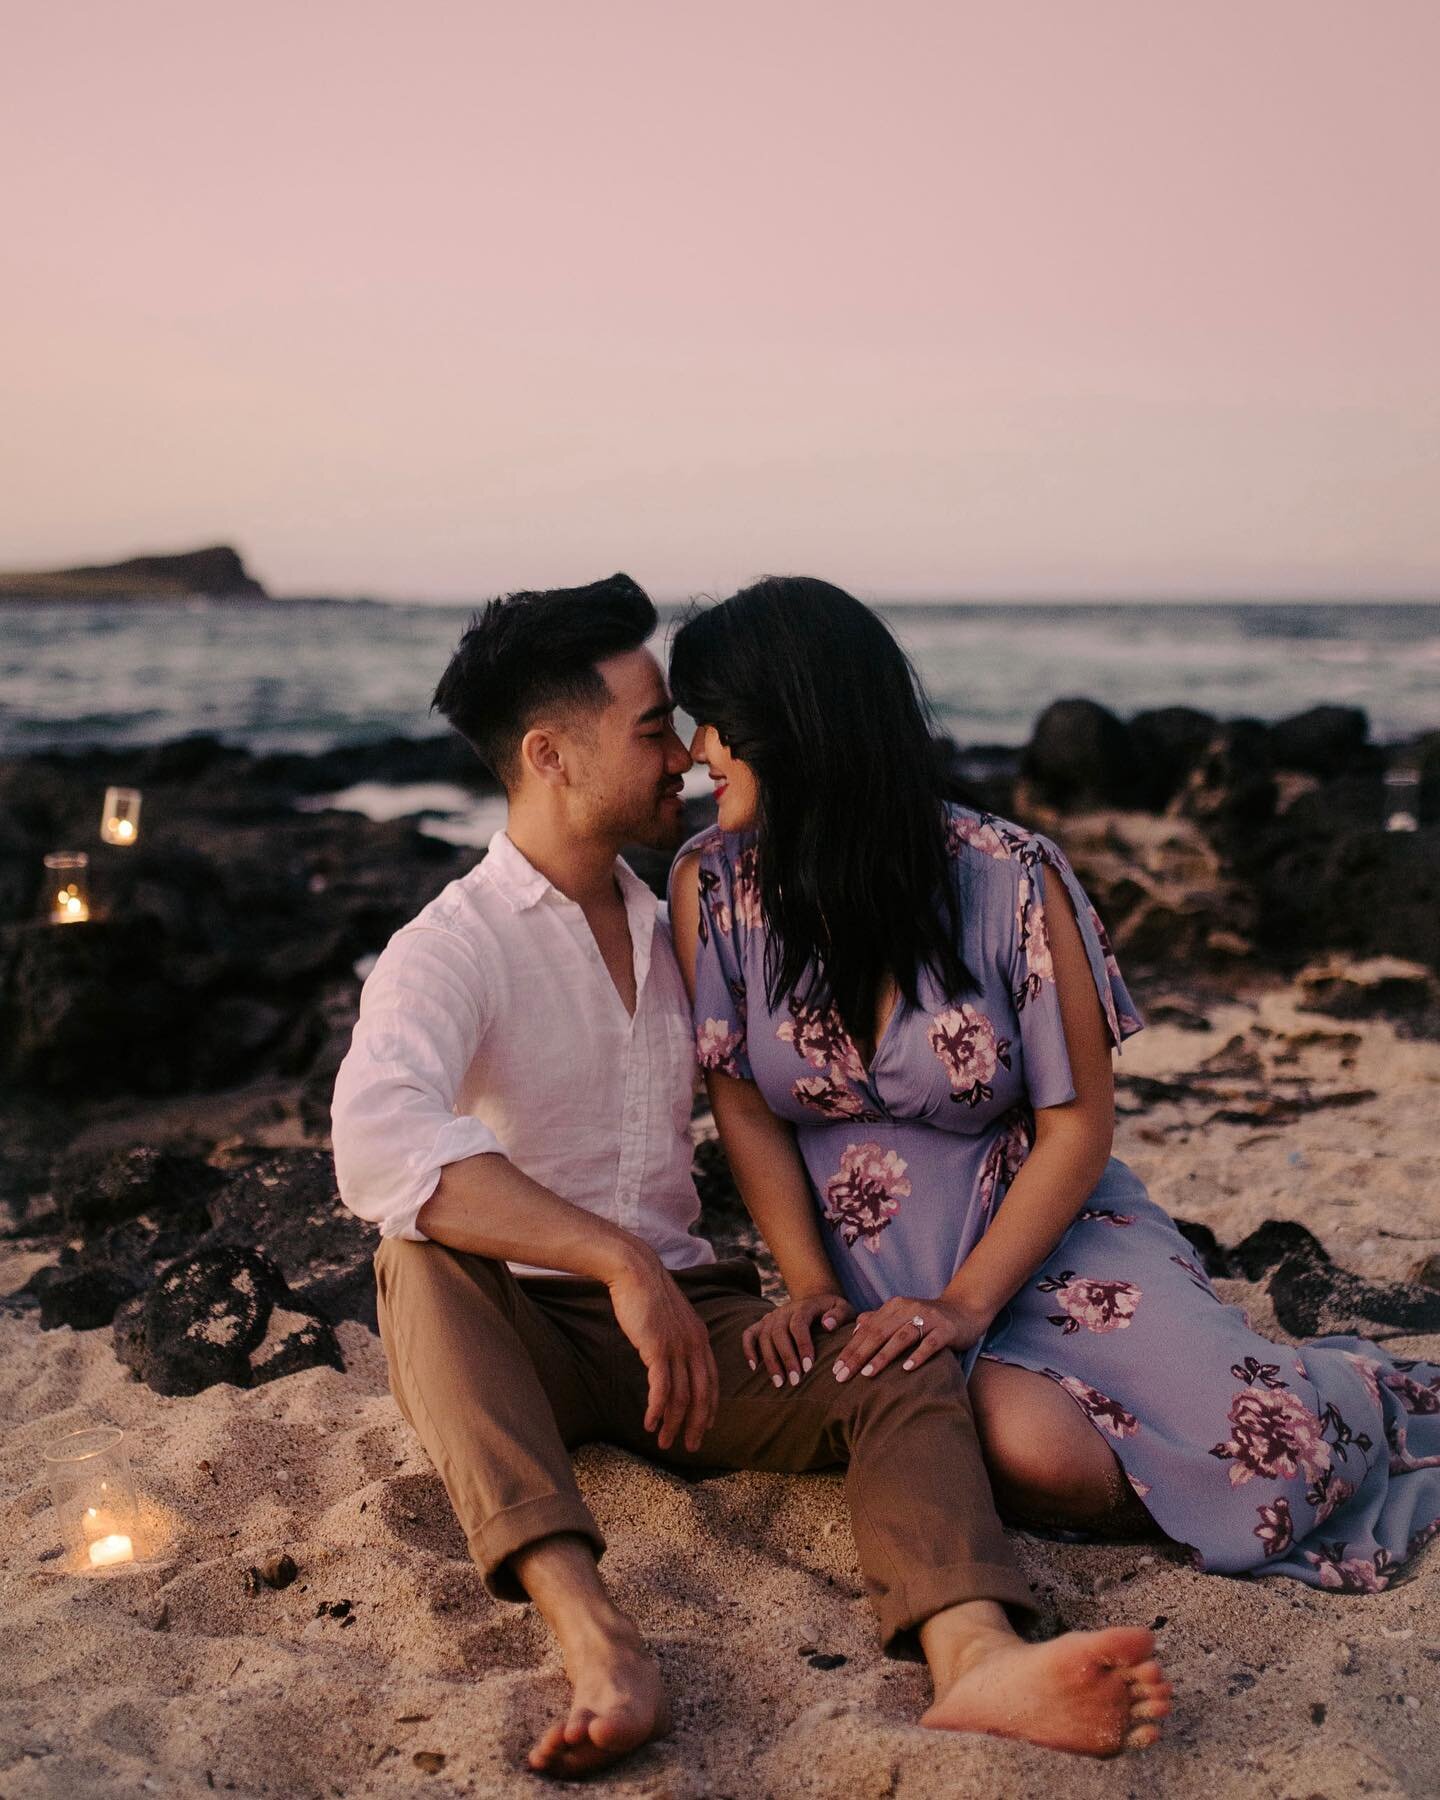 Still not over this dreamy candlelit proposal✨

**Upcoming availability: 3 sessions available for August, 1 session during the first two weeks of September, and 1 session during the last two weeks of October. Head to the link in my bio to inquire!